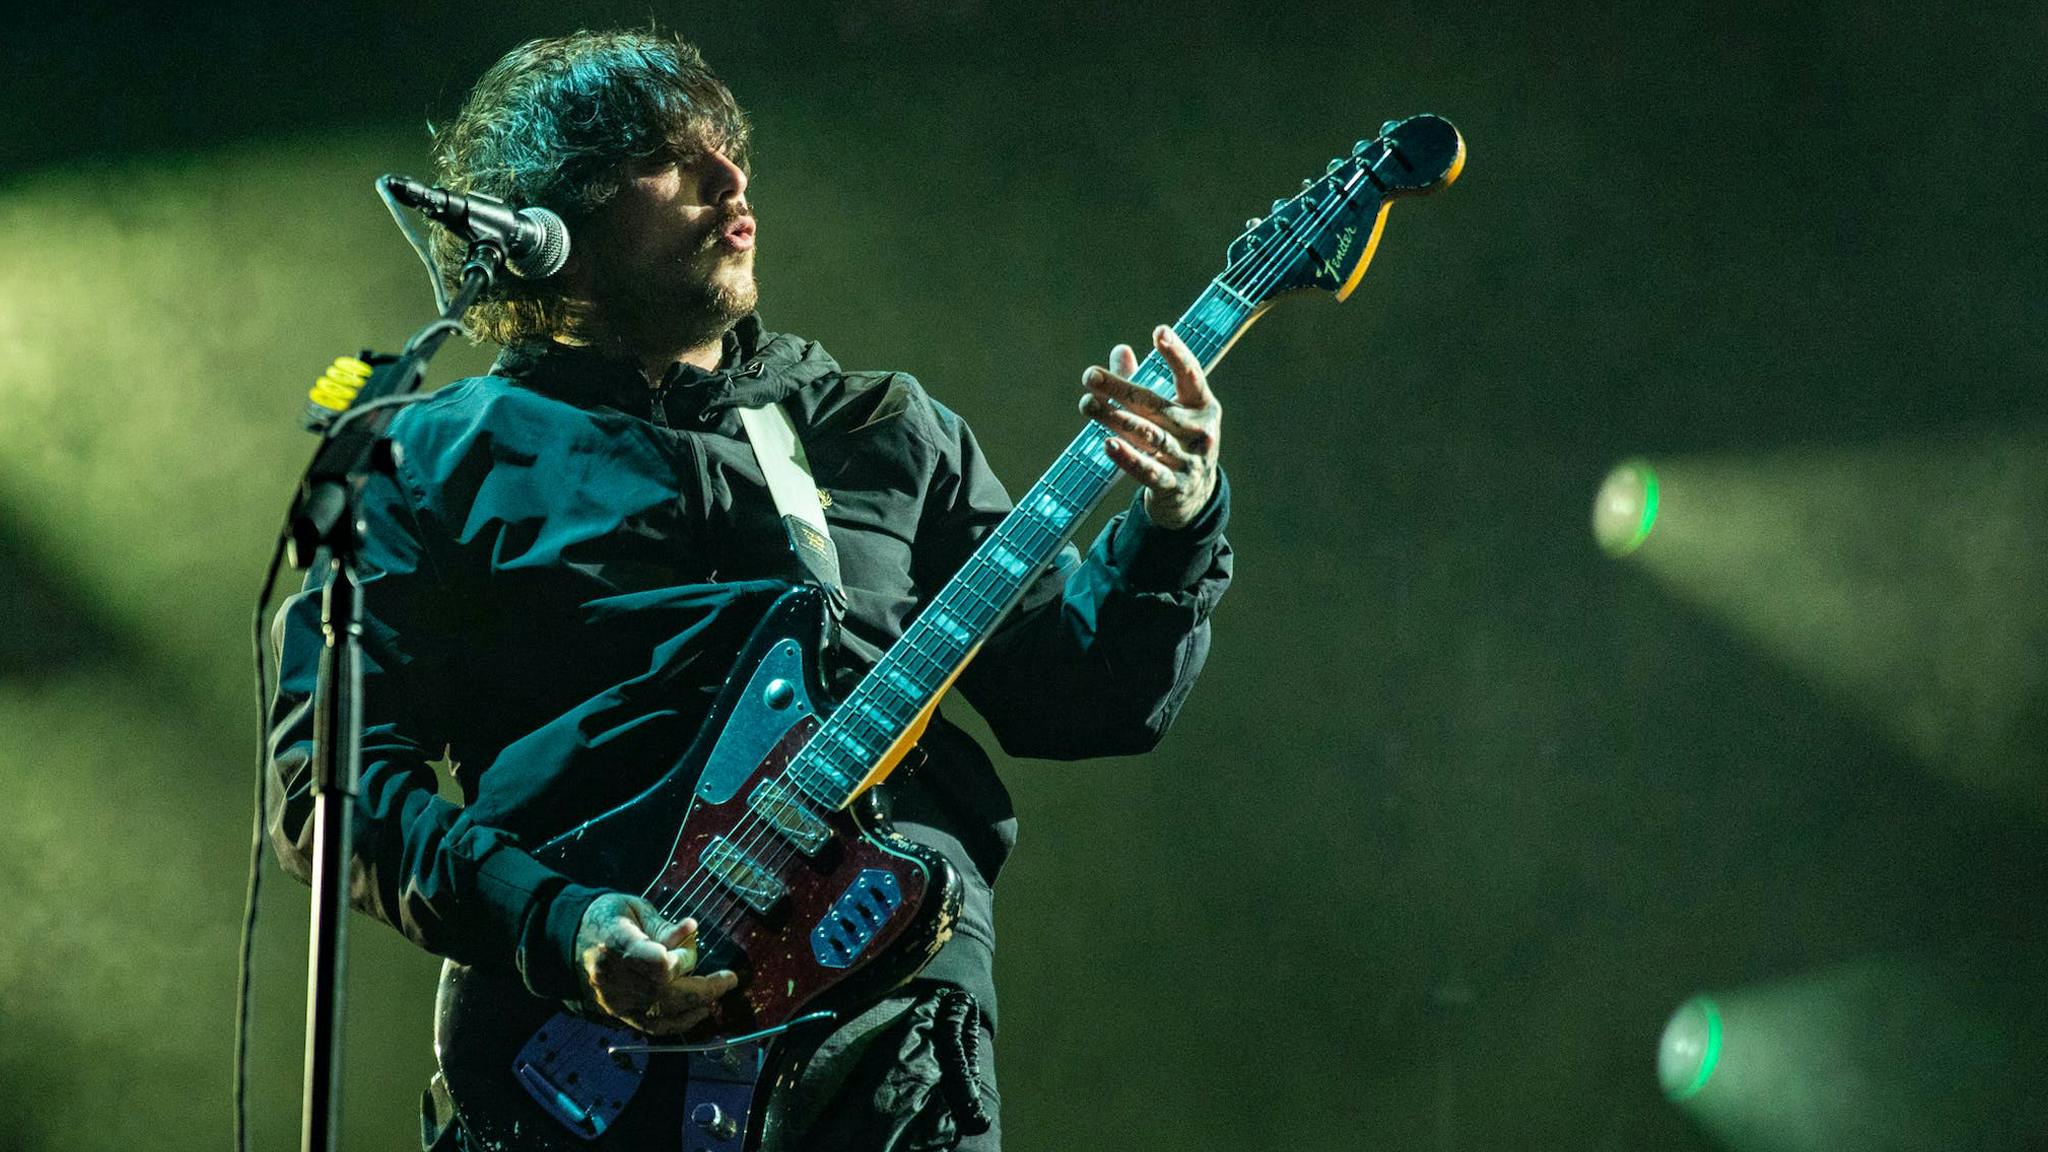 Frank Iero: “I’m still surprised and excited by everything that goes along with this life”